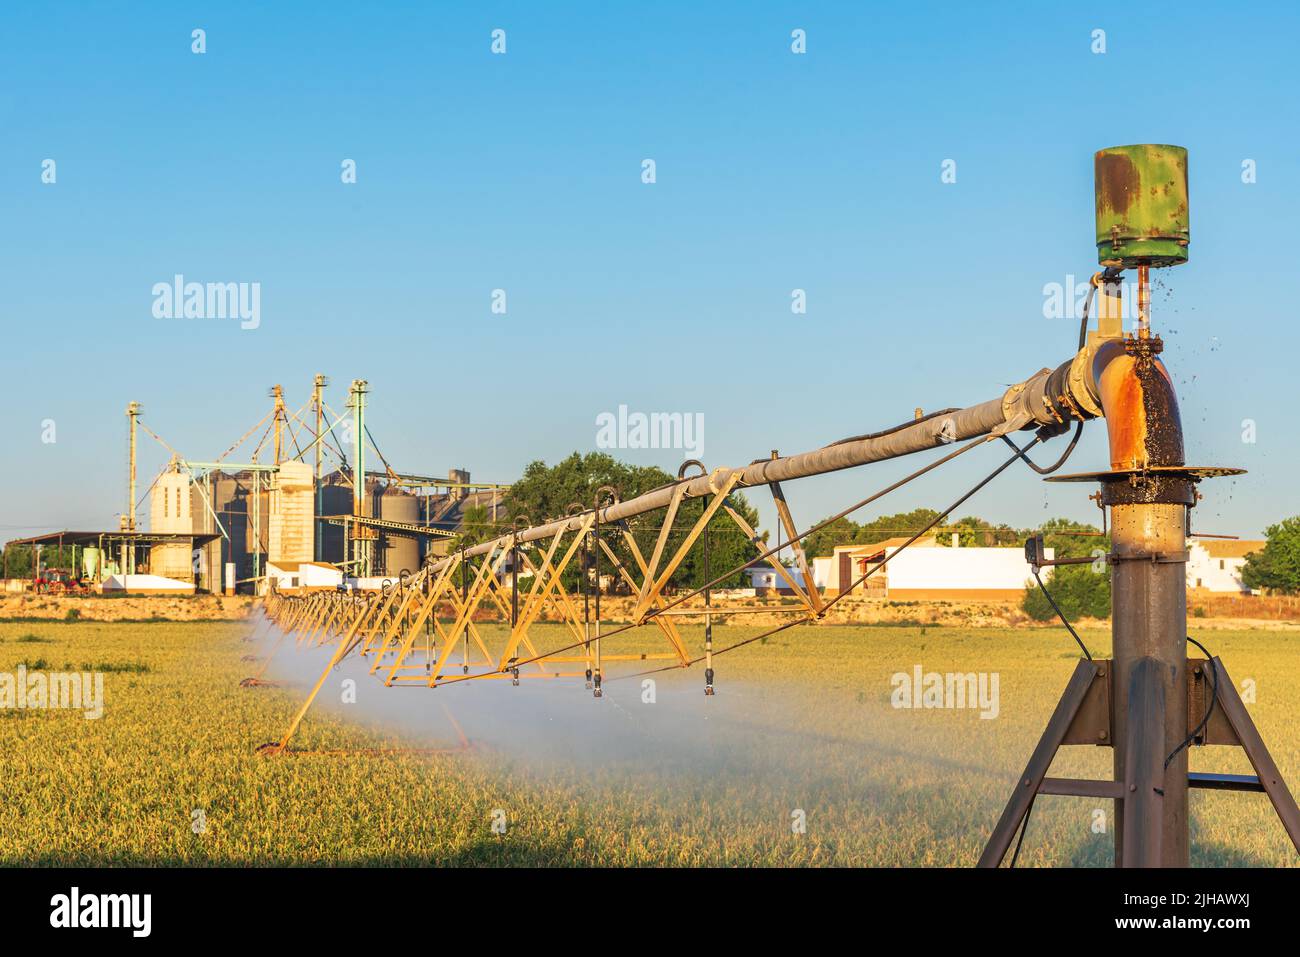 Central pivot irrigation system, irrigation pipes with sprinklers on wheels that rotate on a central axis. Stock Photo